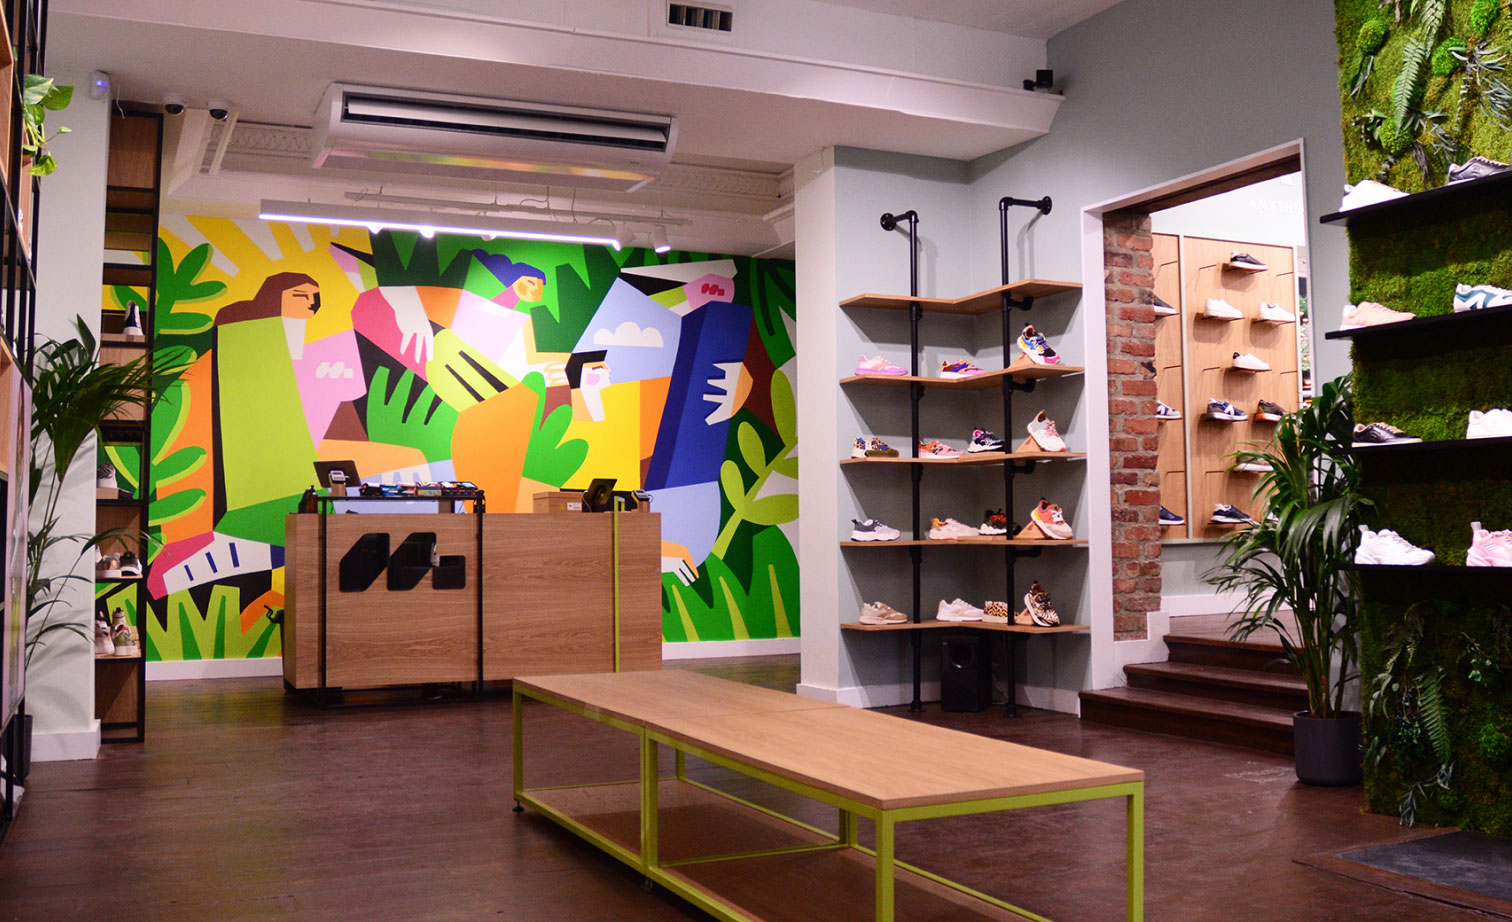 Inside of Movrs physical store